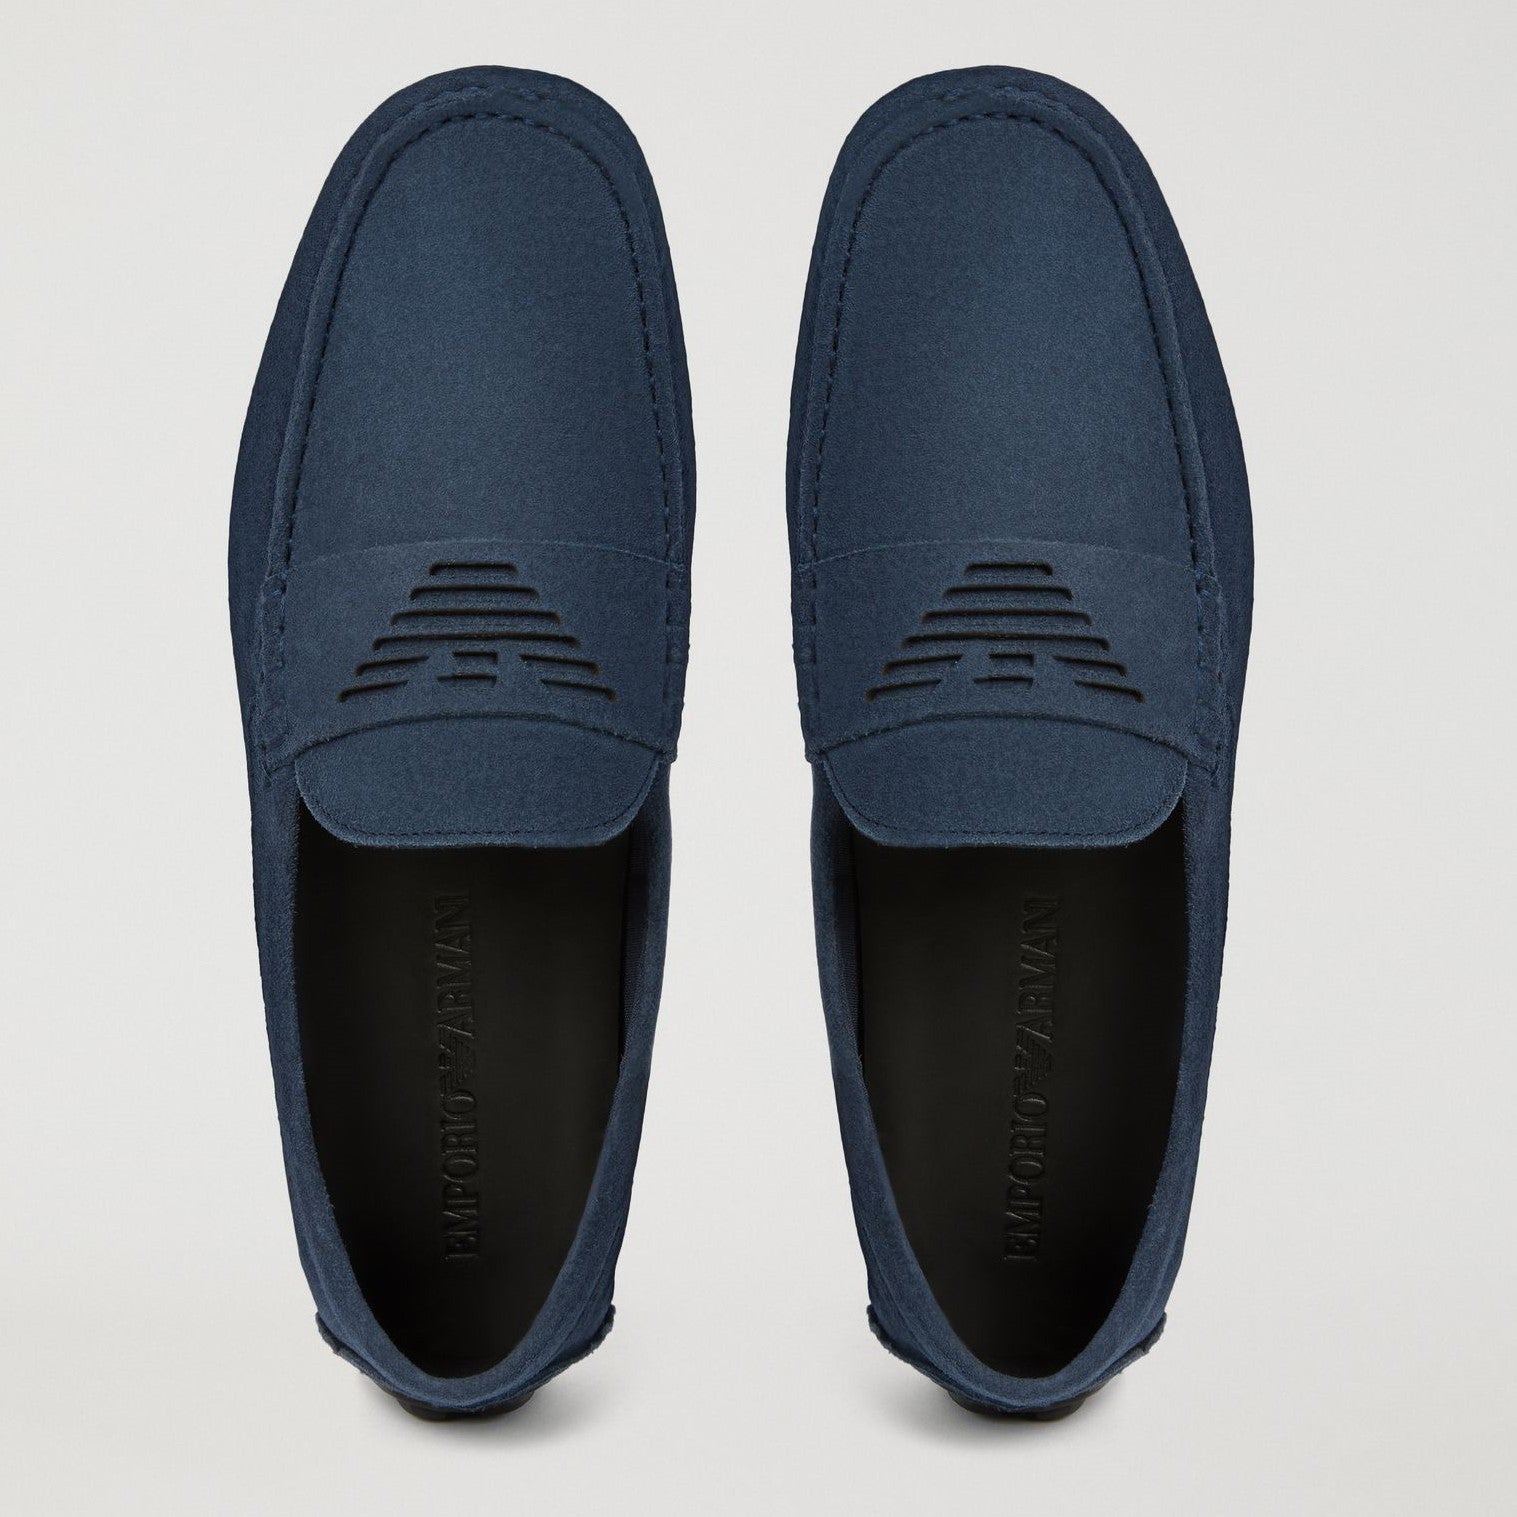 armani loafer shoes